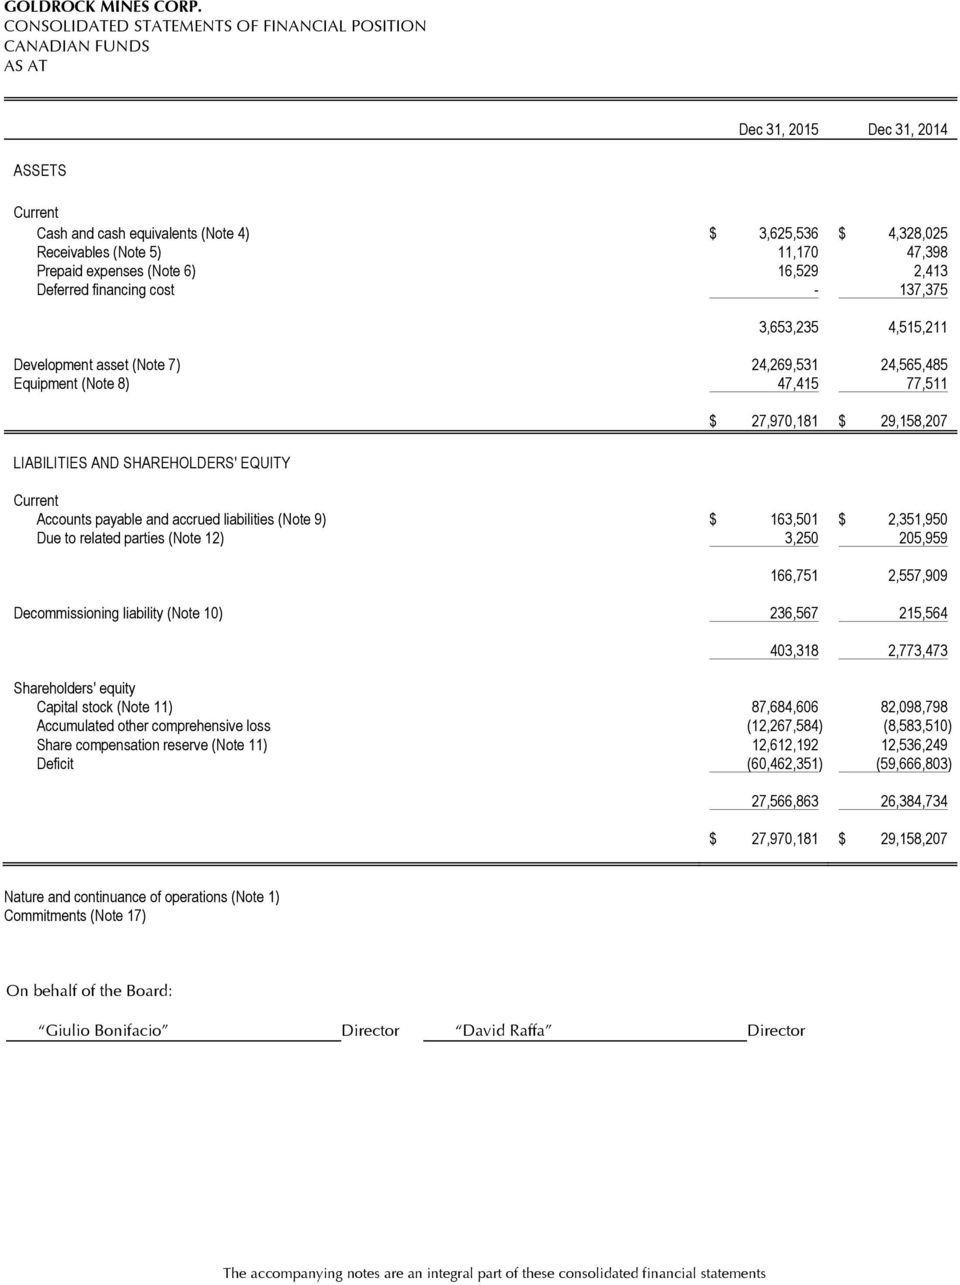 EQUITY $ 27,970,181 $ 29,158,207 Current Accounts payable and accrued liabilities (Note 9) $ 163,501 $ 2,351,950 Due to related parties (Note 12) 3,250 205,959 166,751 2,557,909 Decommissioning